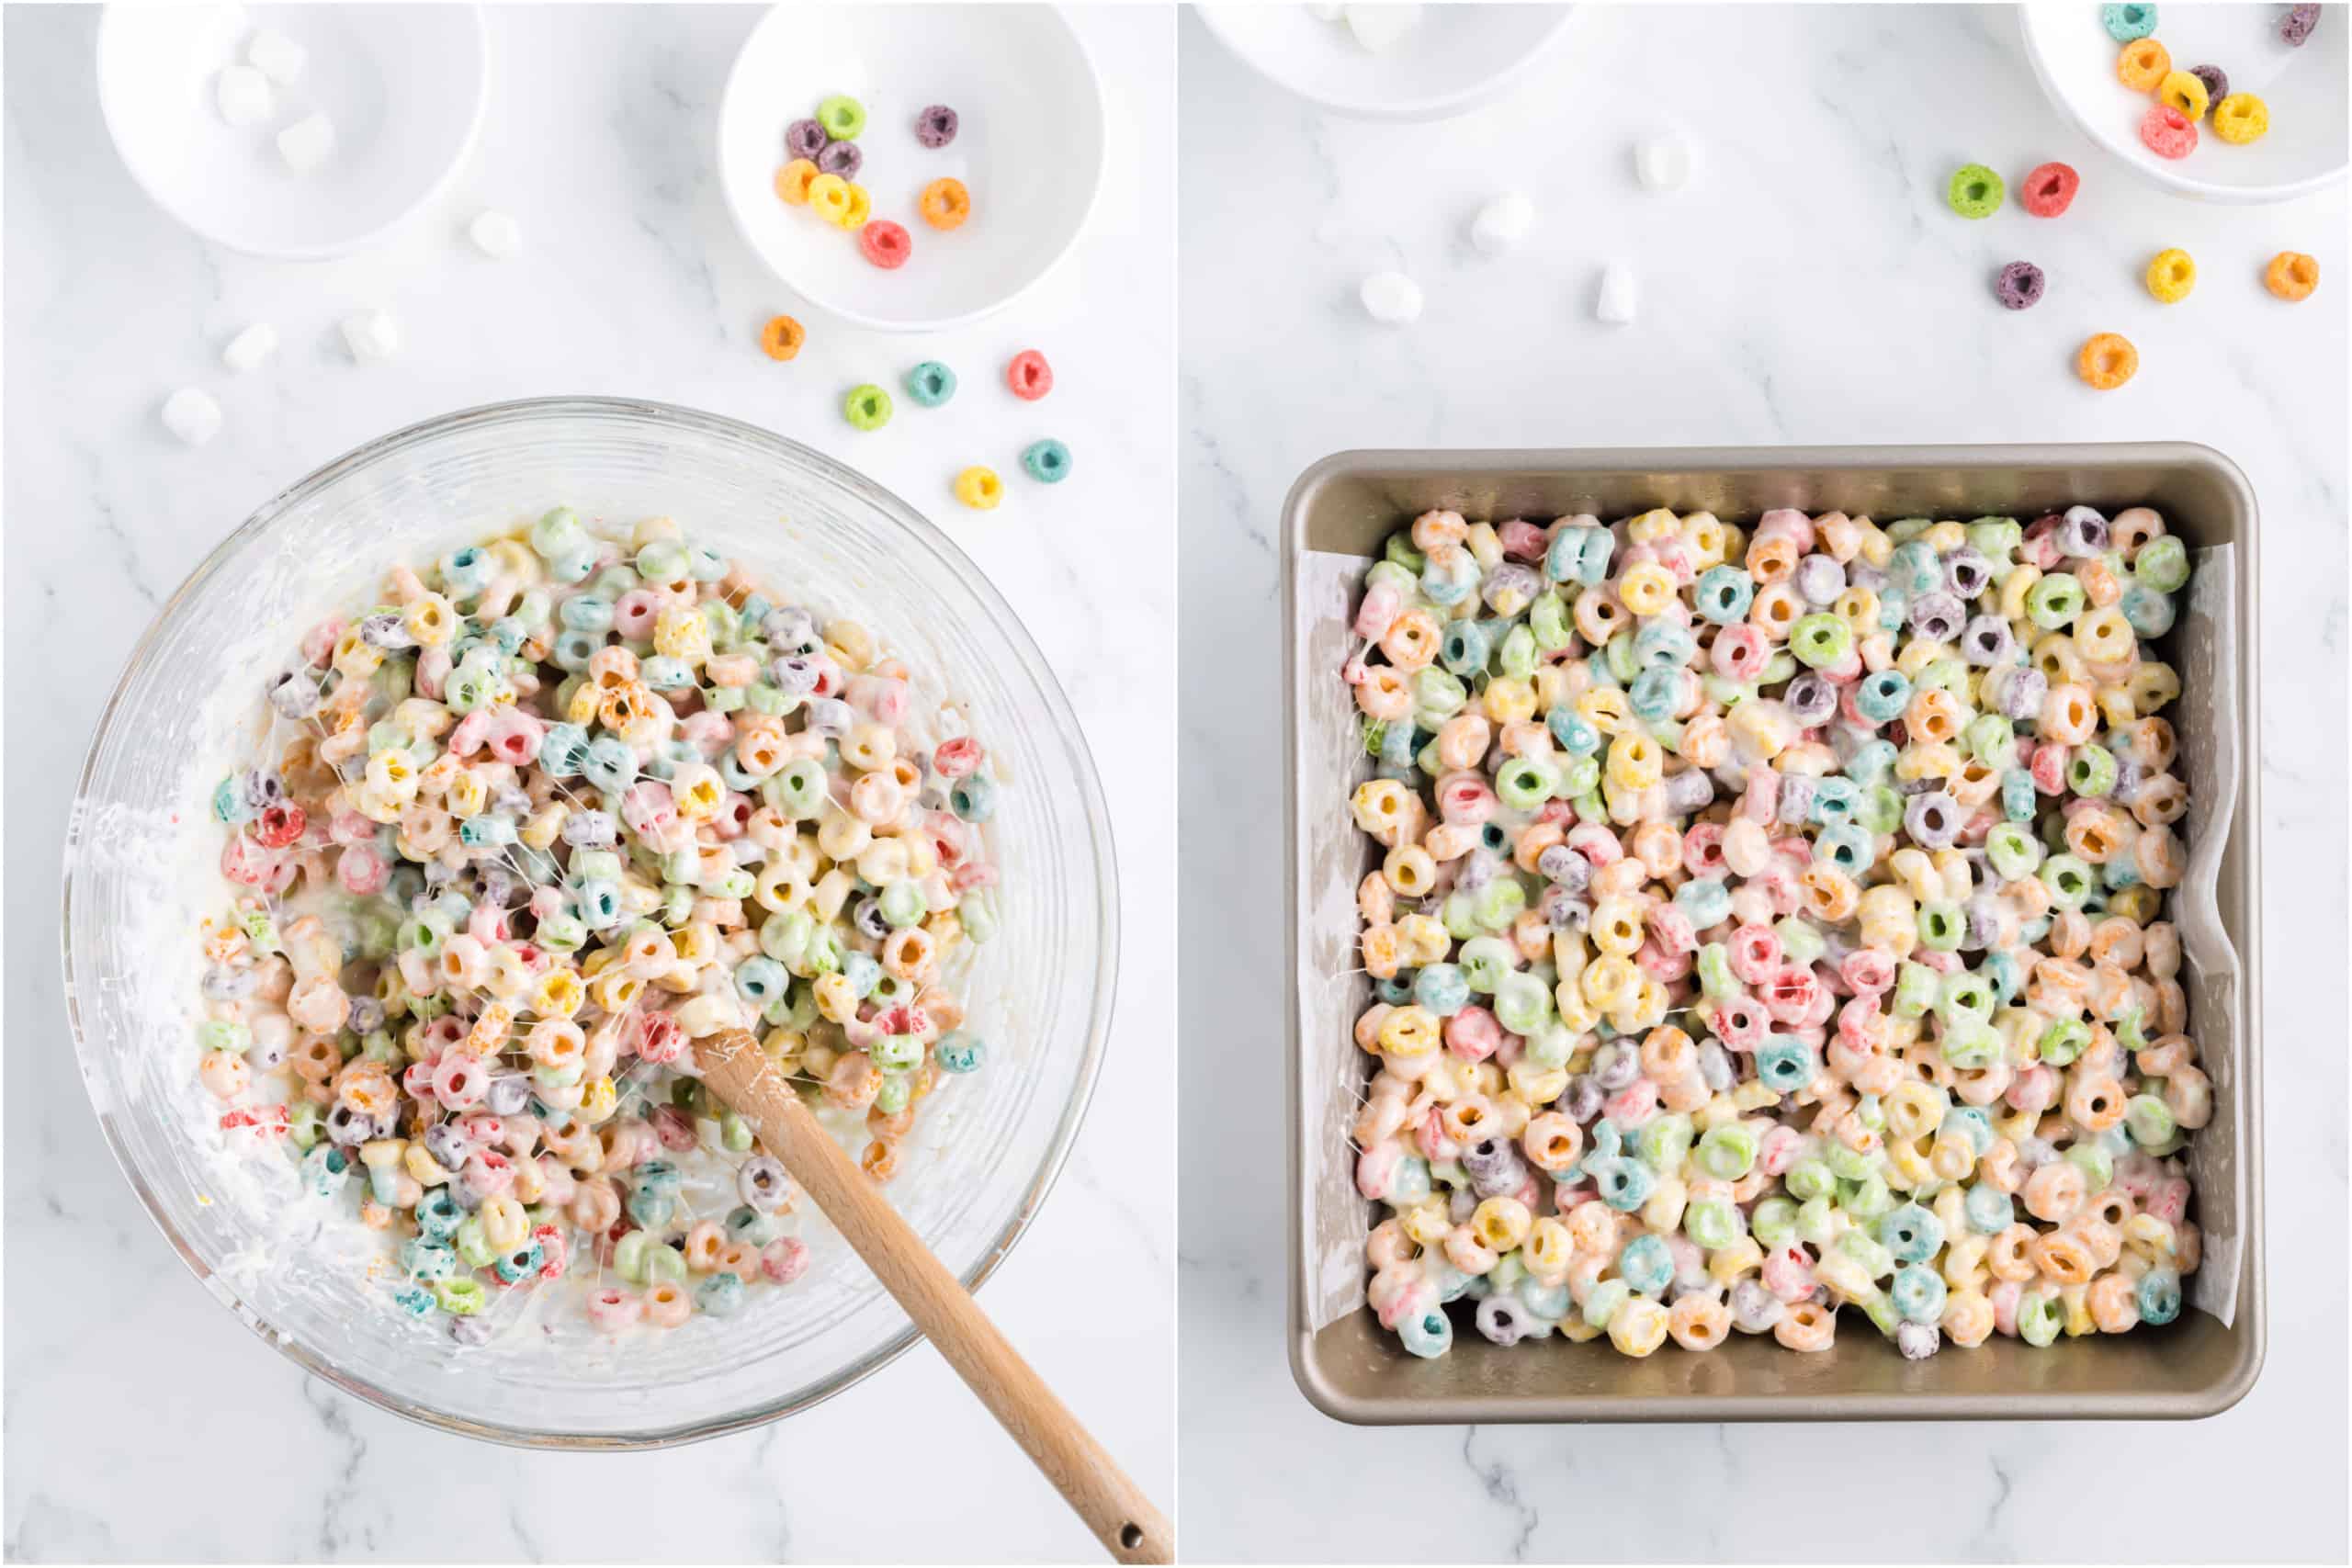 Step by step photos showing how to make froot loops.